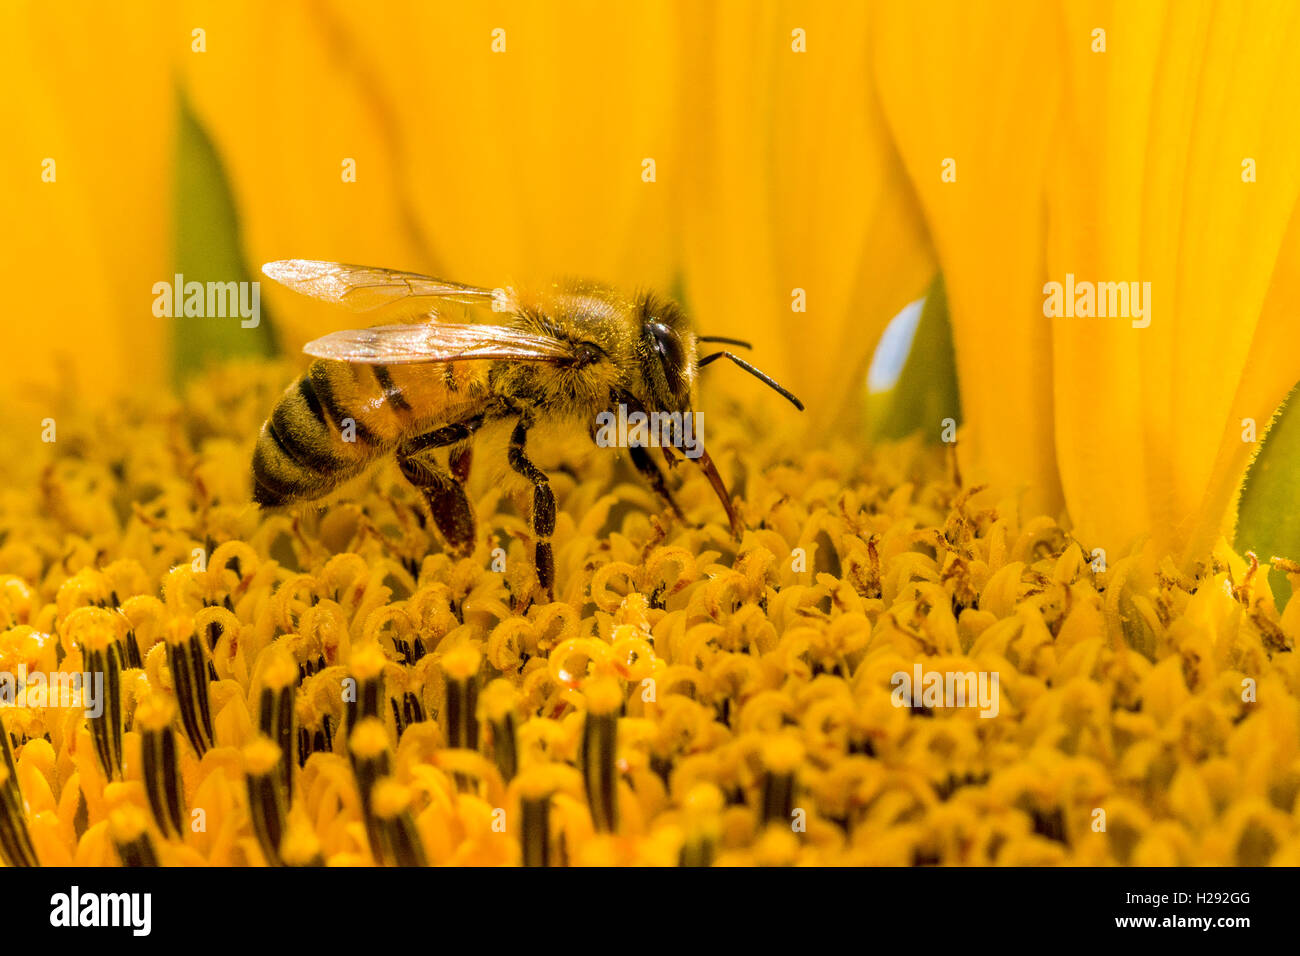 Carniolan honey bee (Apis mellifera carnica) is collecting nectar at a common sunflower (Helianthus annuus) blossom, Saxony Stock Photo